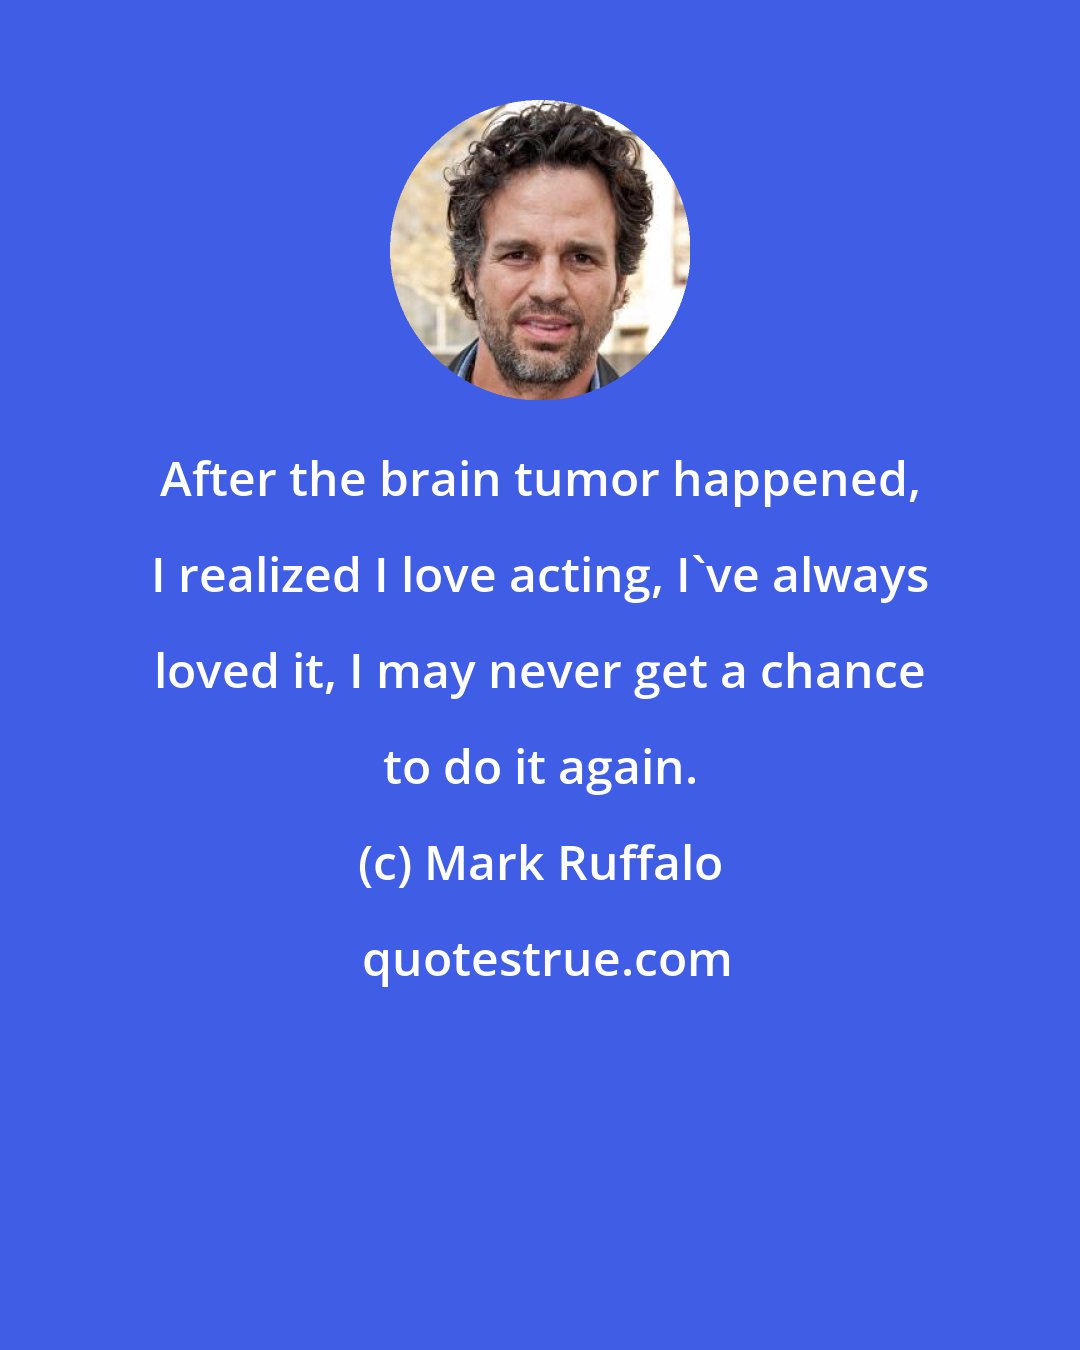 Mark Ruffalo: After the brain tumor happened, I realized I love acting, I've always loved it, I may never get a chance to do it again.